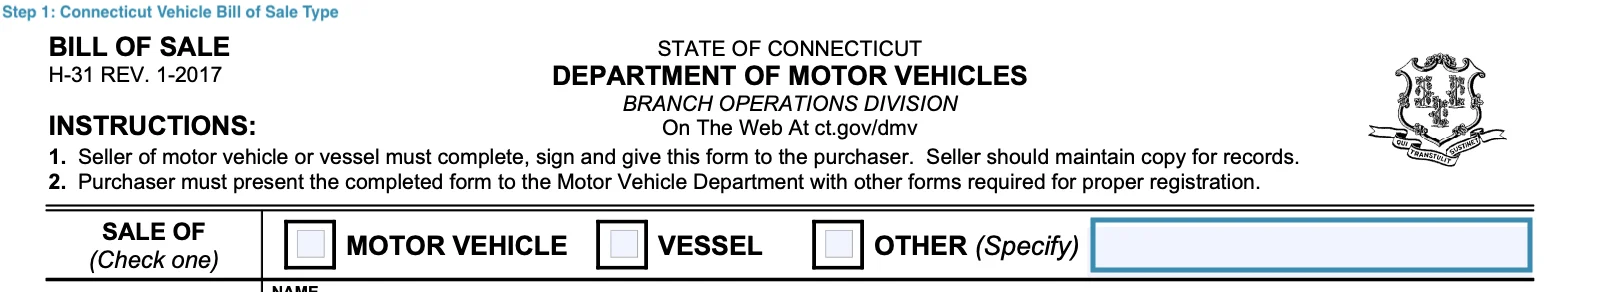 Section to select the type of vehicle of bill of sale for vehicle for Connecticut